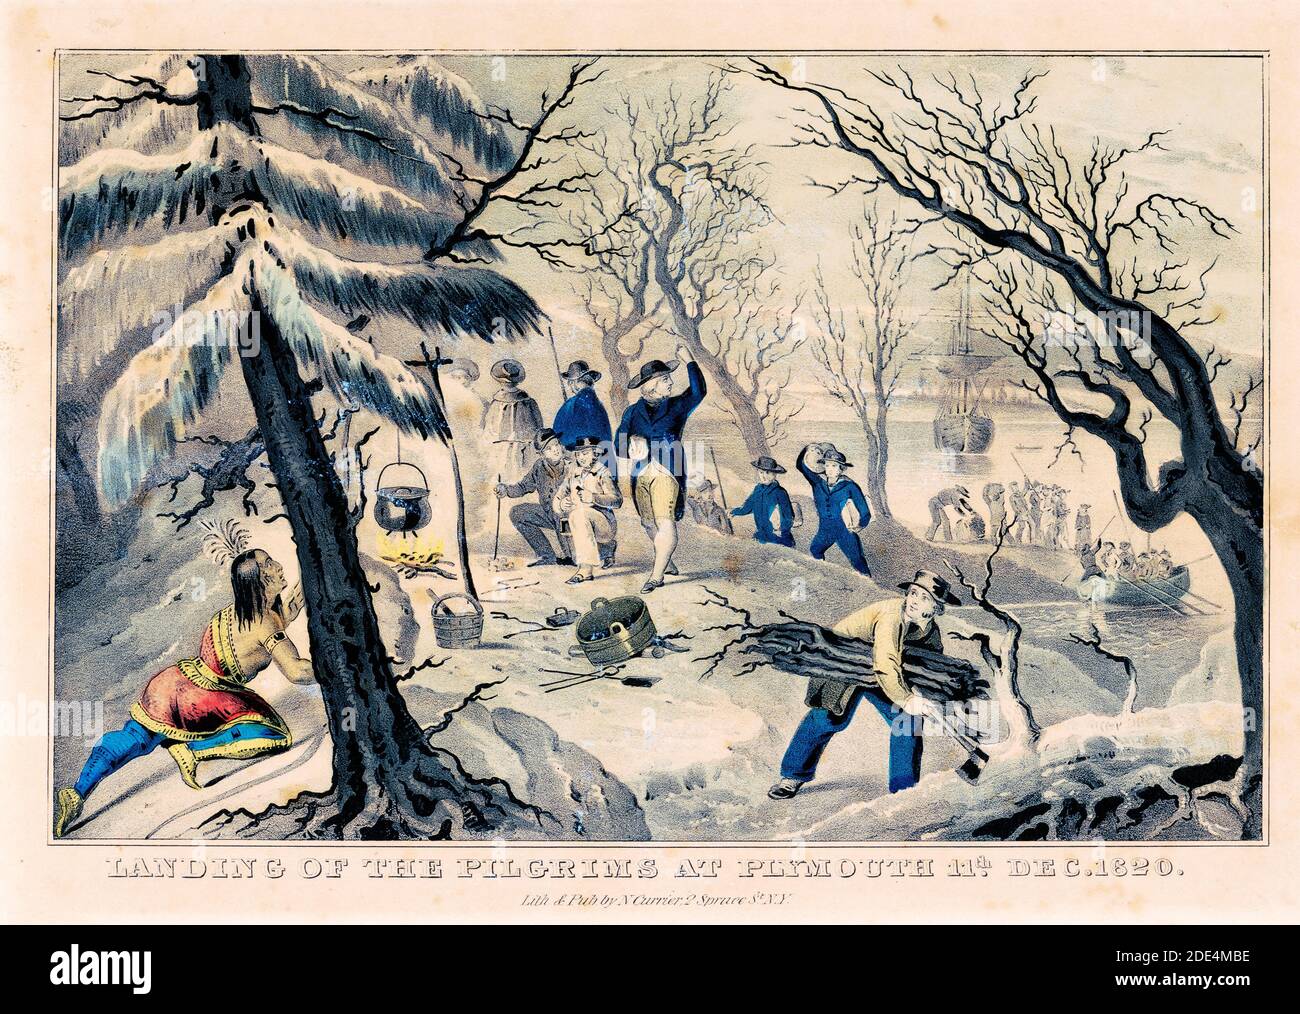 Print shows a Native man, hiding on the left, watching the Pilgrims around a campfire with small cauldron; a man with hatchet is gathering firewood and more Pilgrims are coming ashore from the Mayflower, in a winter scene with snow-covered landscape. Stock Photo